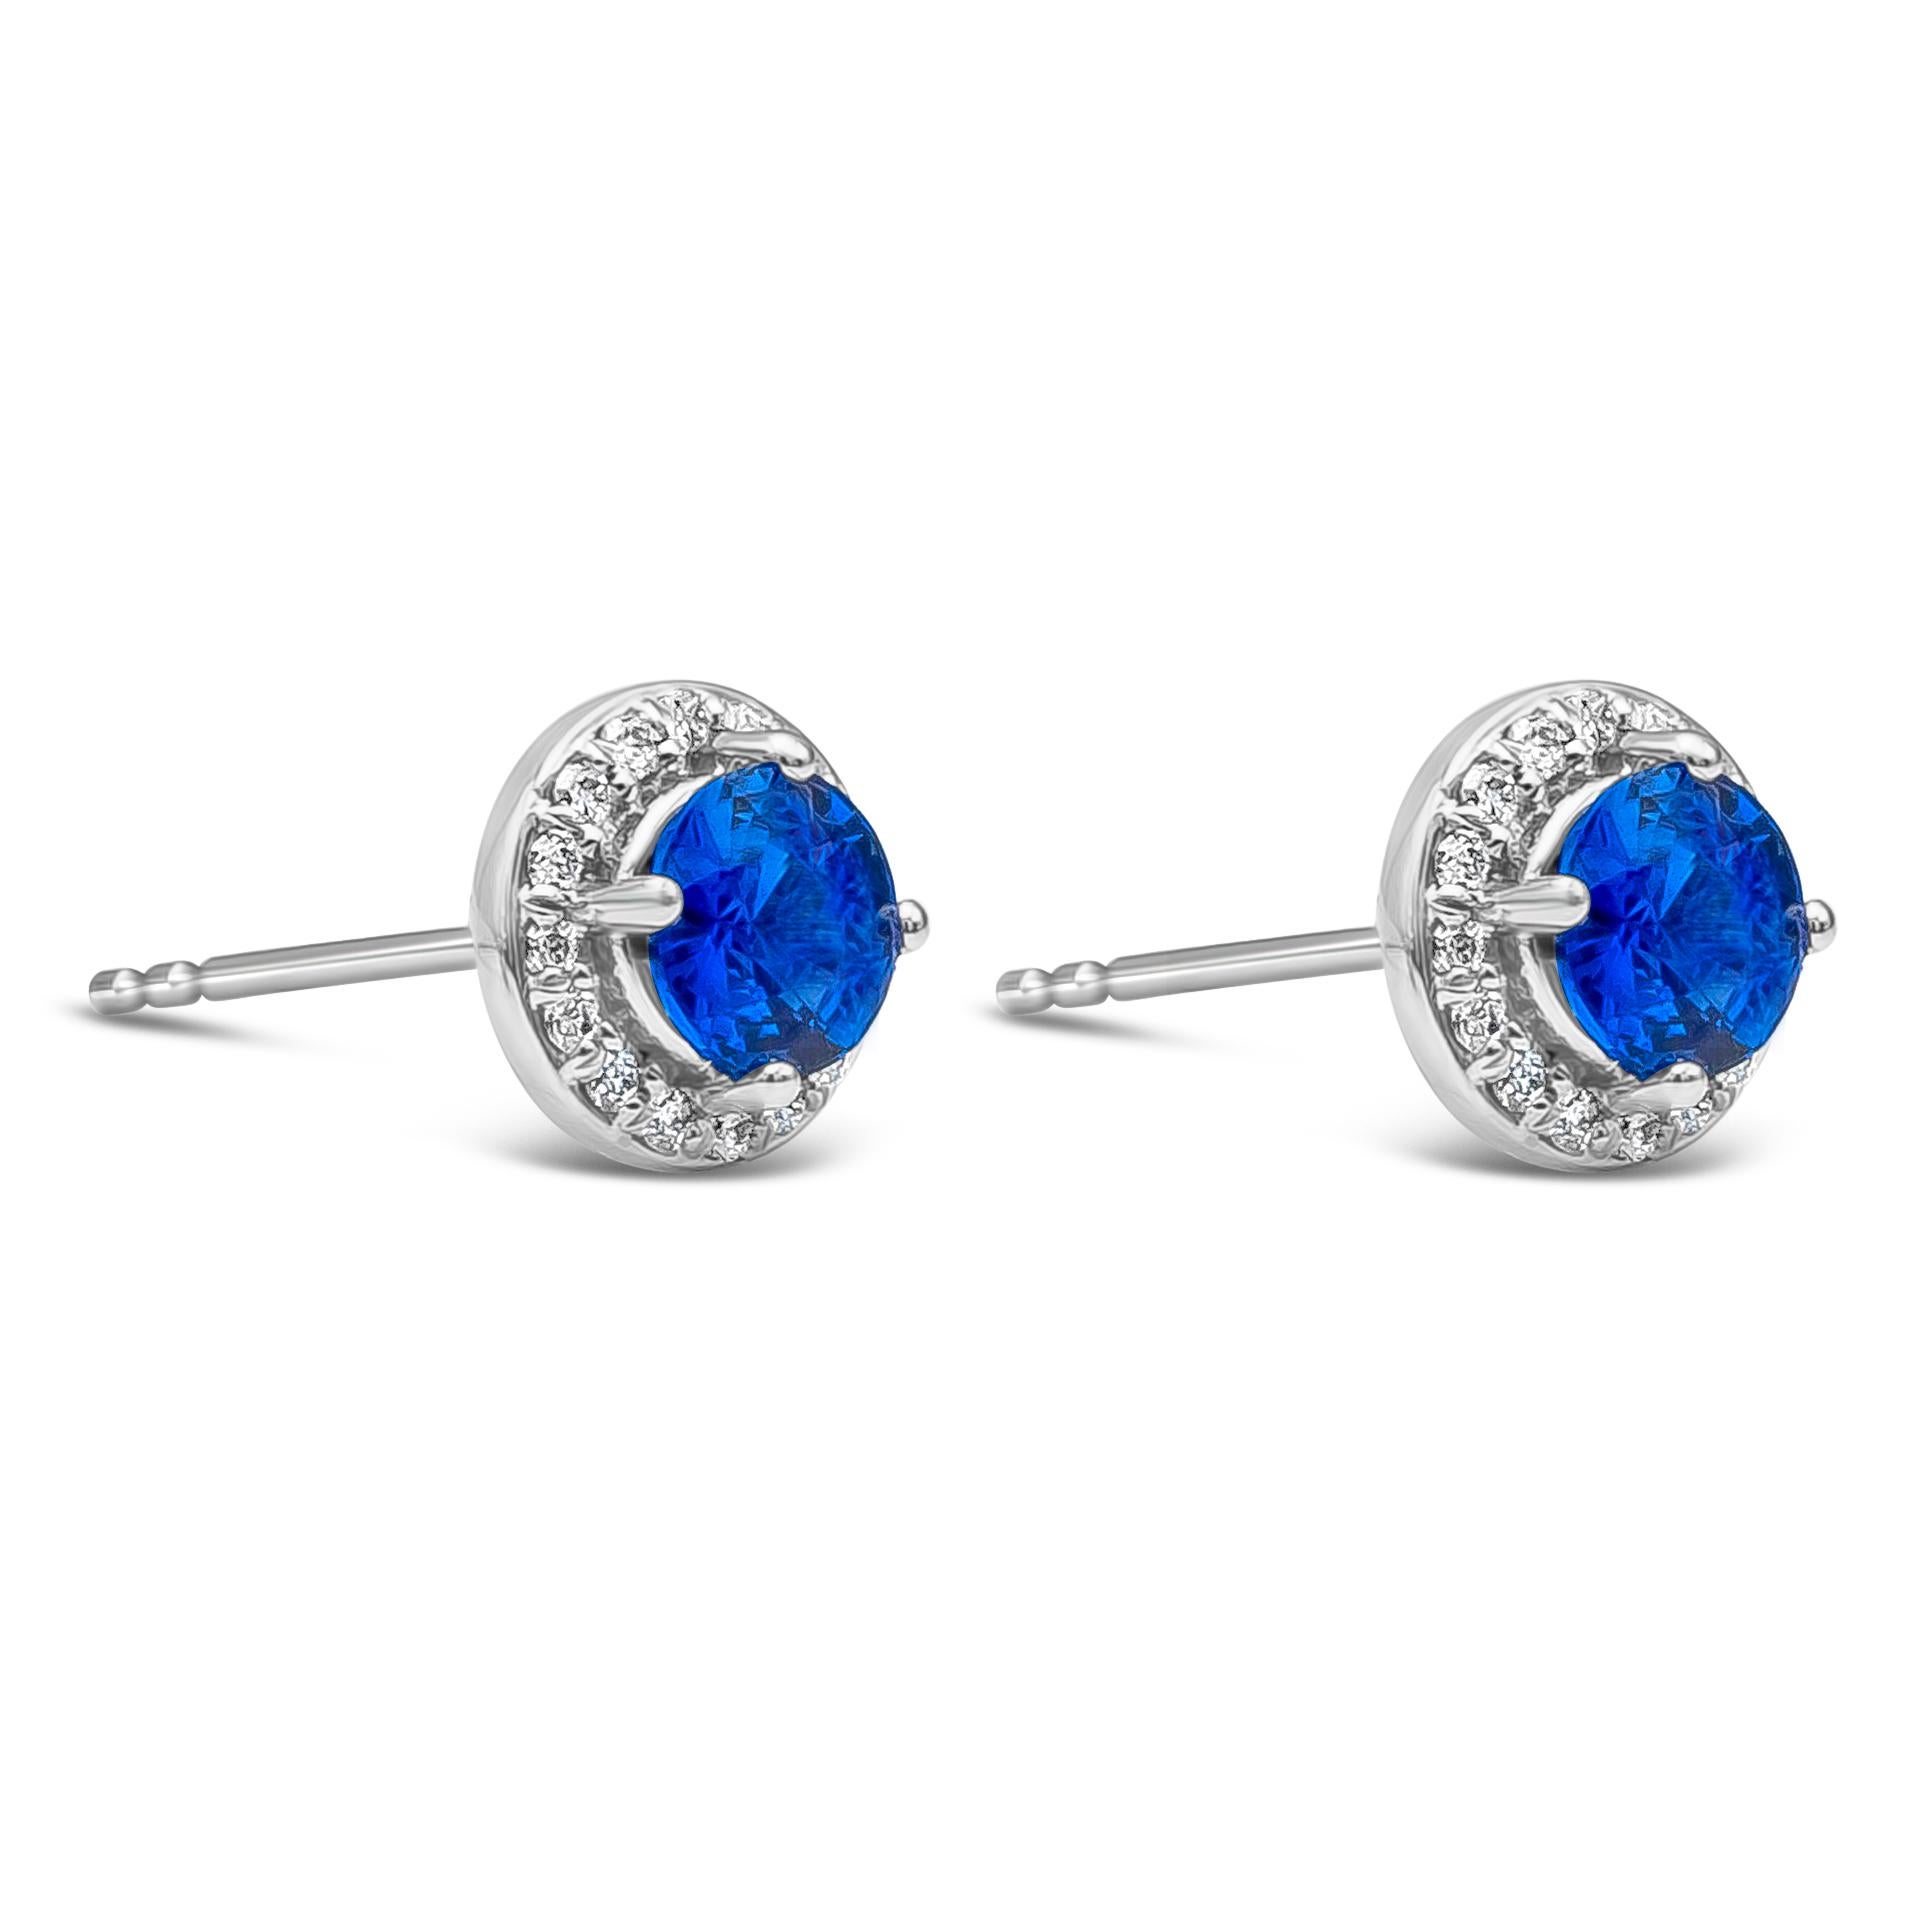 Contemporary Roman Malakov 1.42 Carats Total Blue Sapphire and Diamonds Halo Stud Earrings For Sale